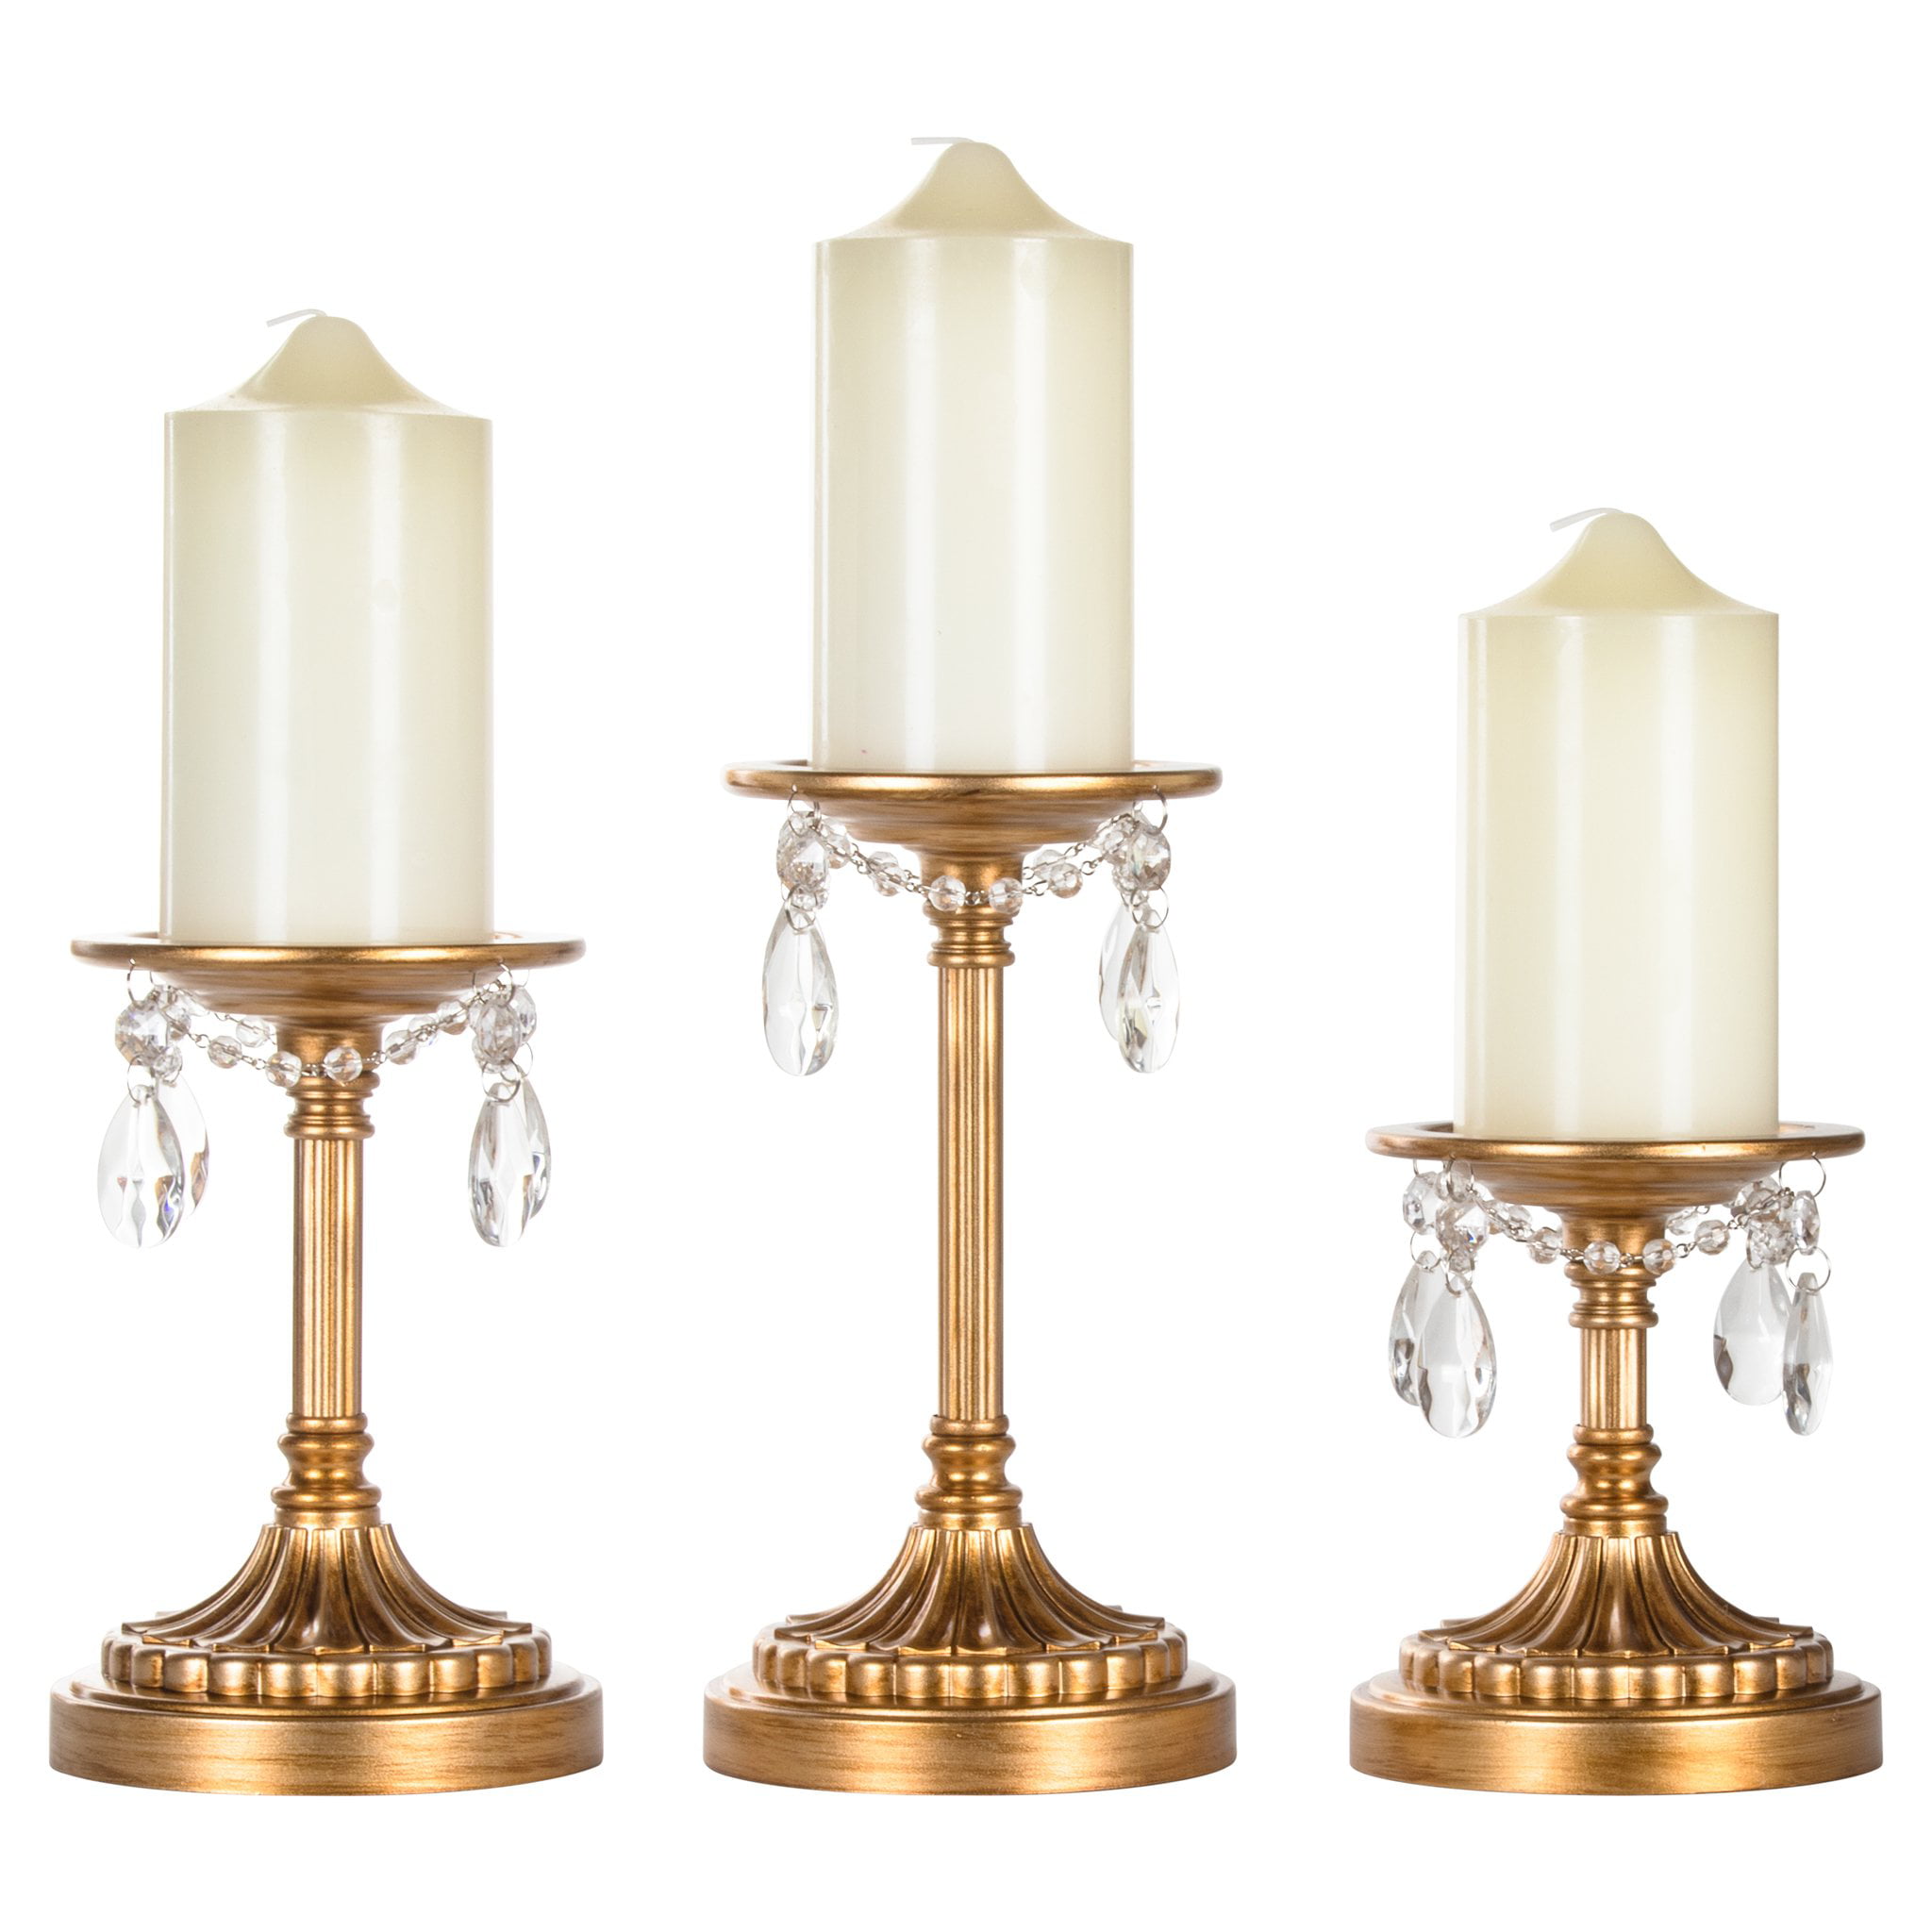 Weighted Base Set of 3 Vintage Gold Pillar Candle Holders Glass Crystal Beads 